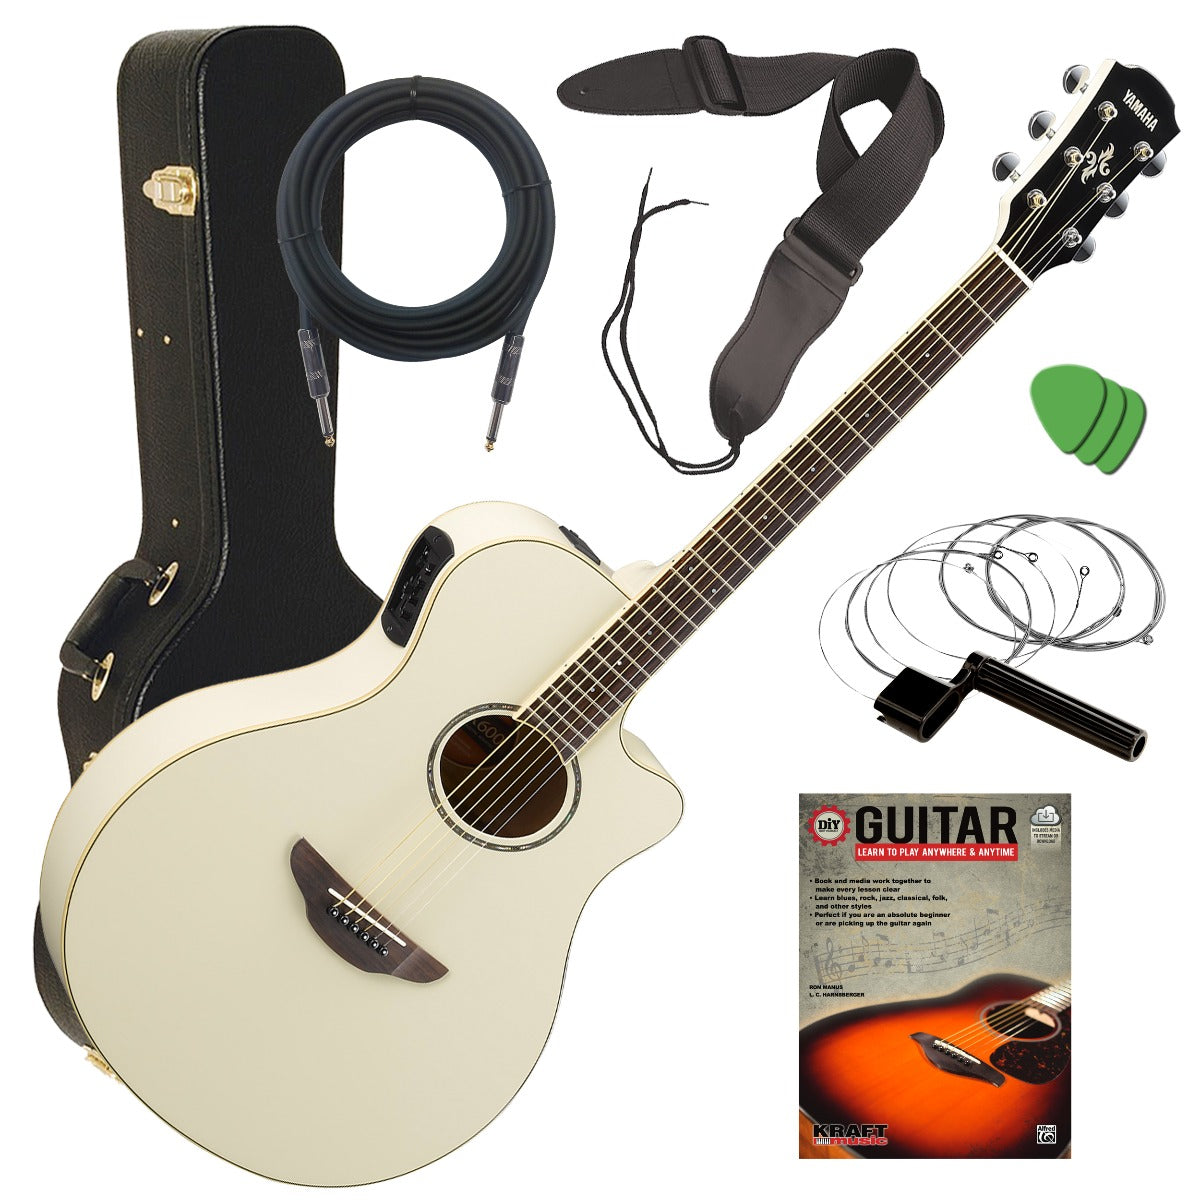 Yamaha APX600 VW Thin Body Acoustic-Electric Guitar, Vintage White